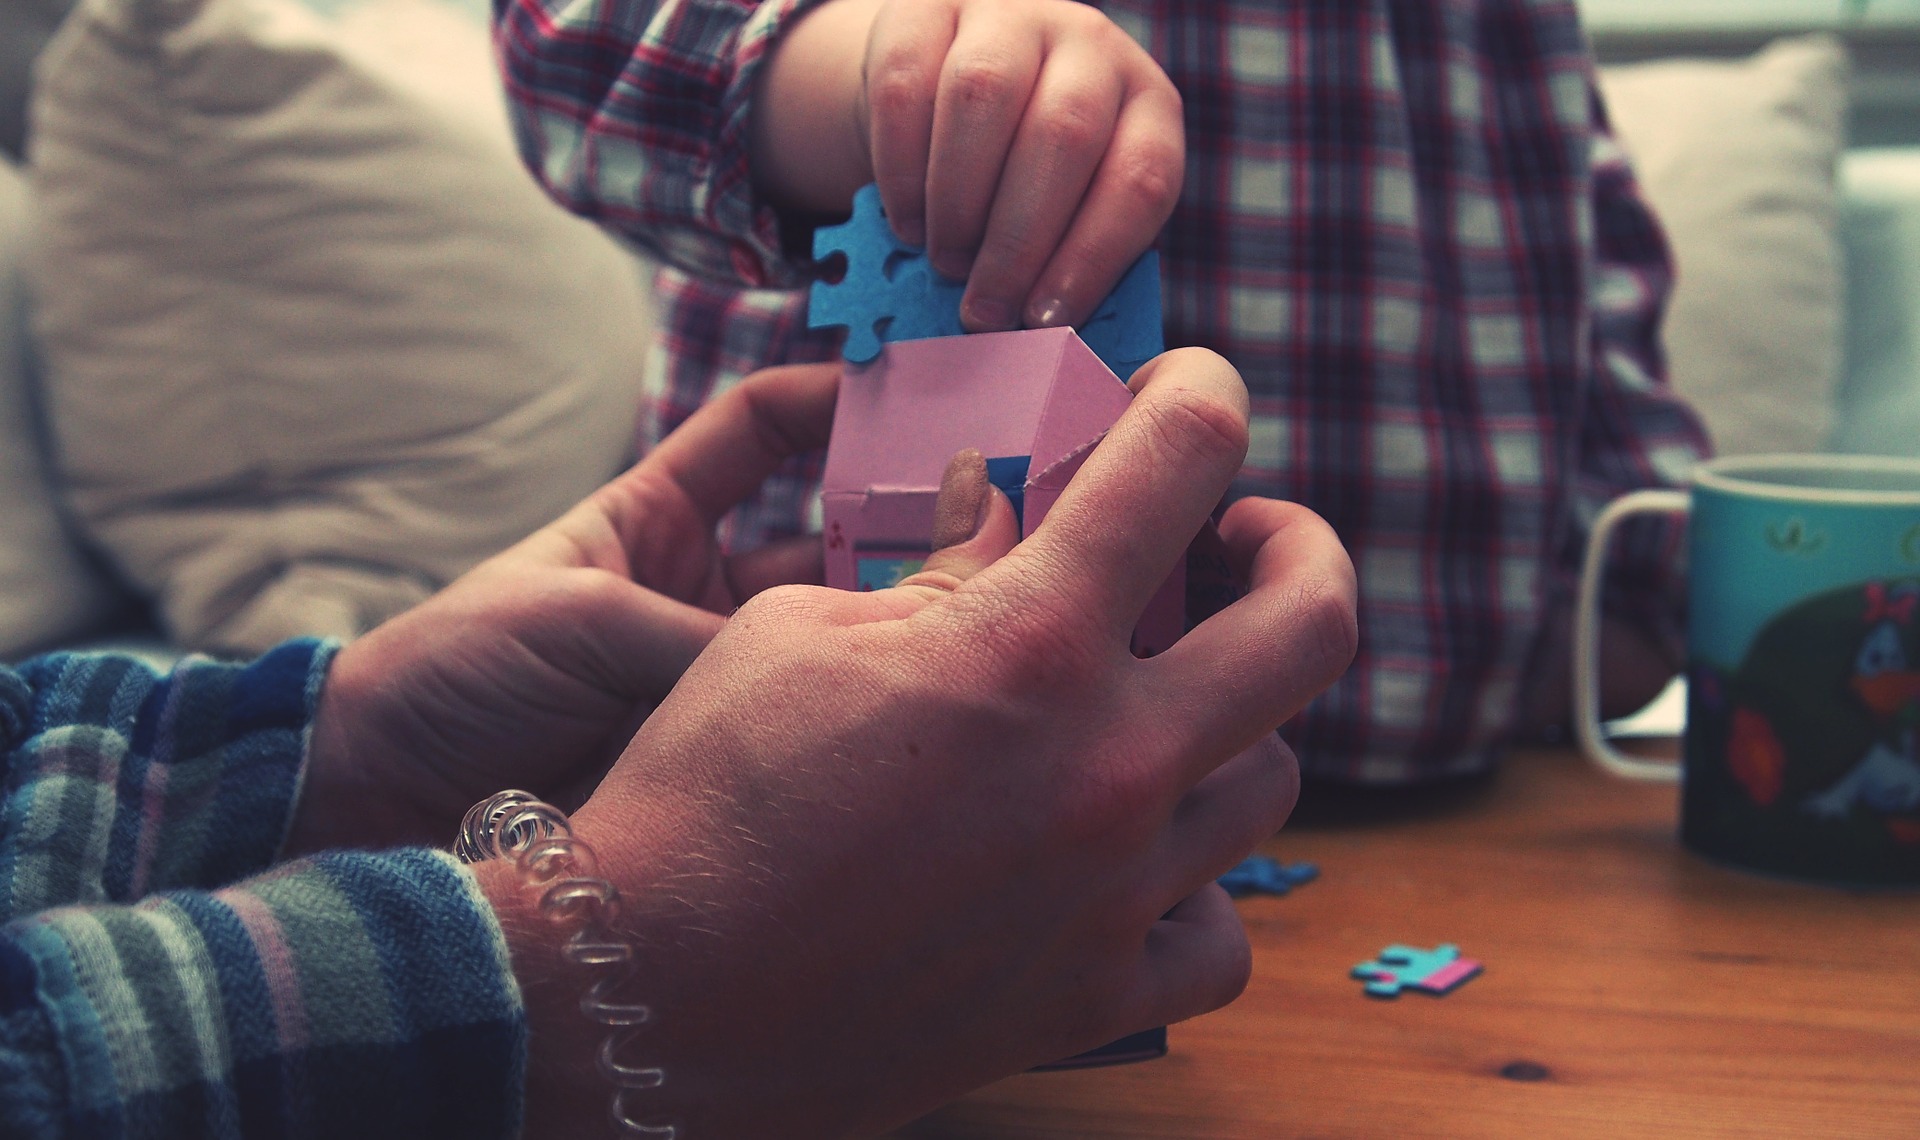 An adult hands open a tiny pink box, as a child hand holds two puzzle pieces.